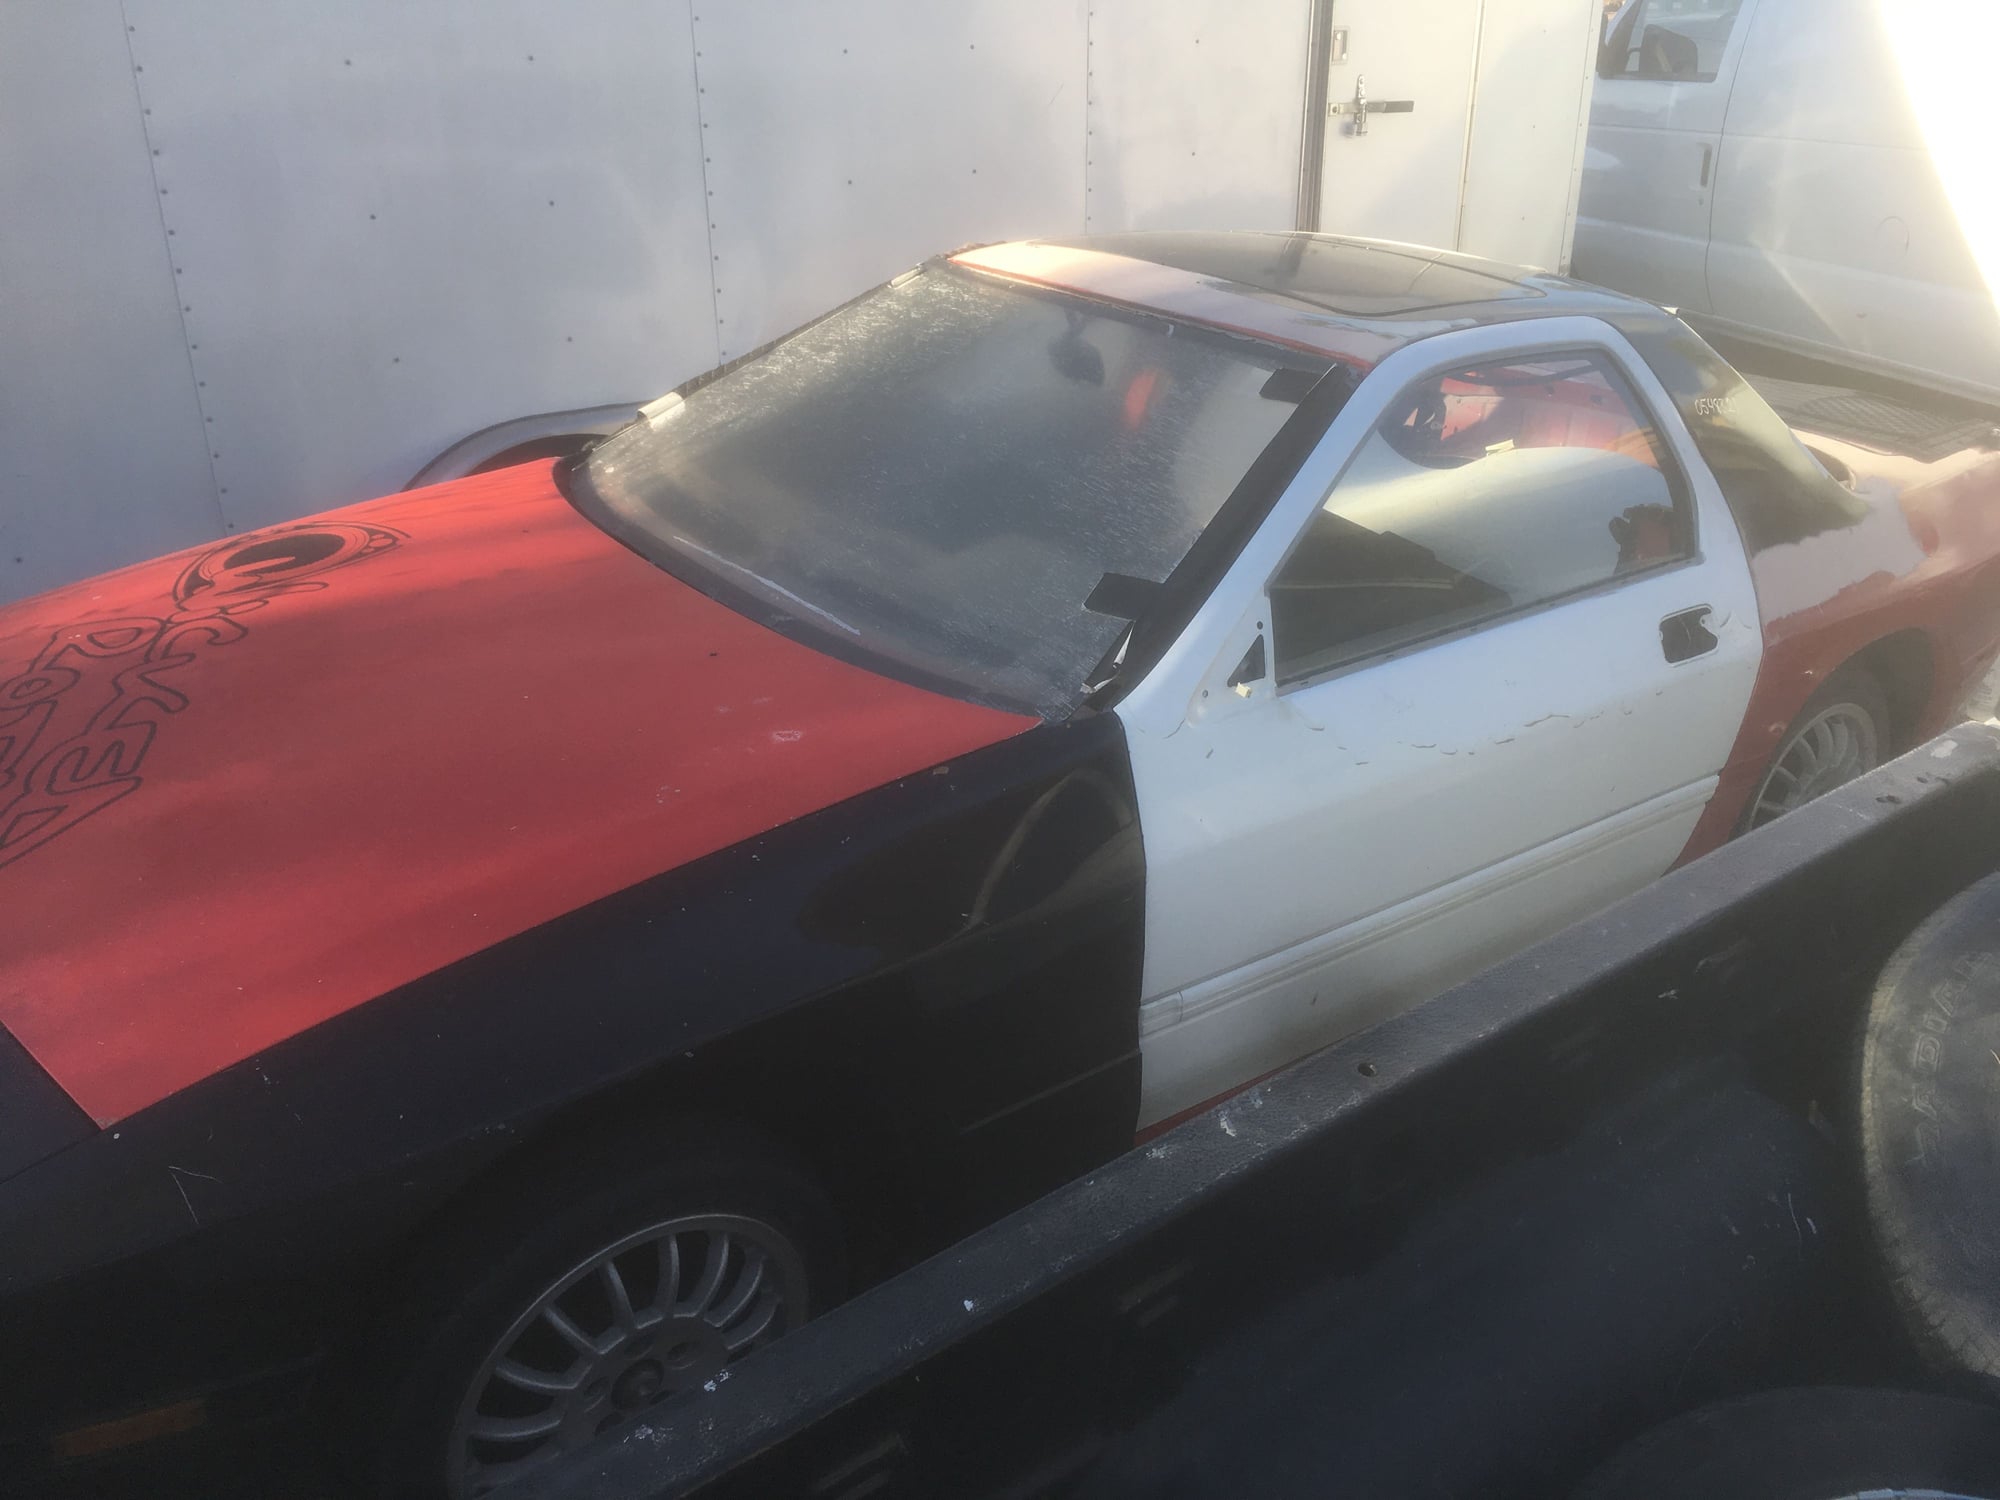 1990 Mazda RX-7 - Well im not sure what it is we call it A COUPE /VERT or a notchback - Used - Las Vegas, NV 89108, United States